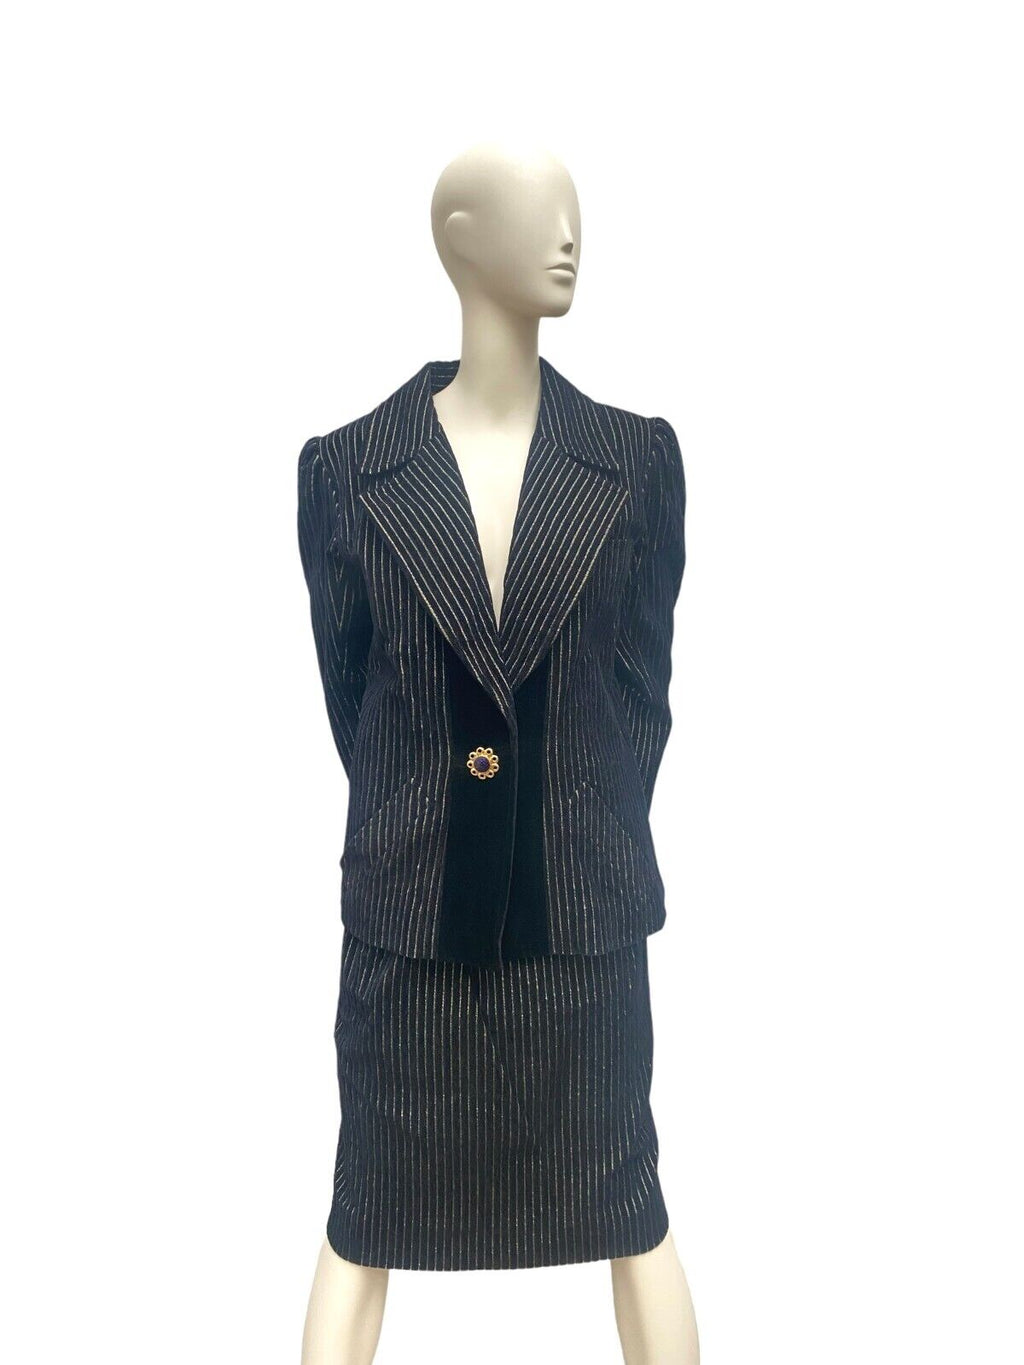 Rive Gauche One of a kind Vintage Striped Suit